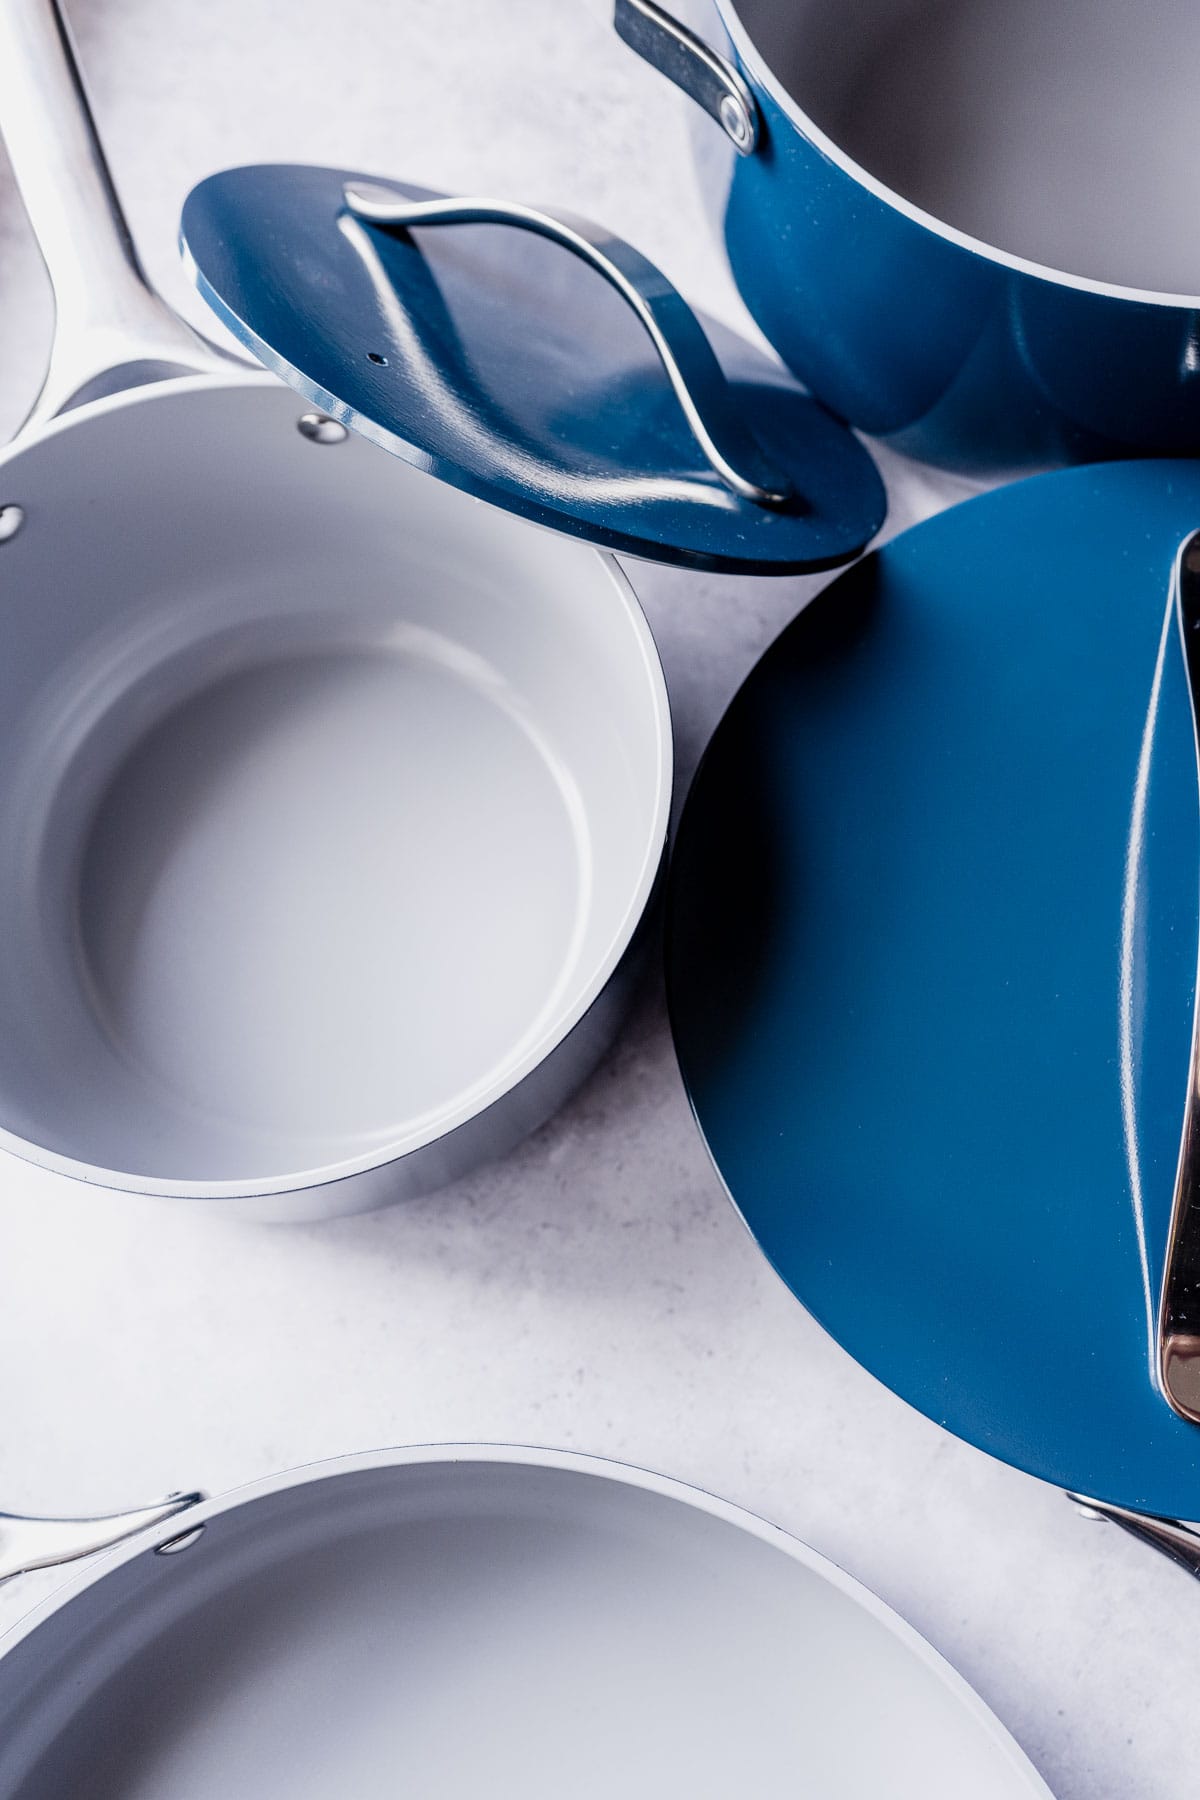 A blue ceramic cookware set resting on a gray table.